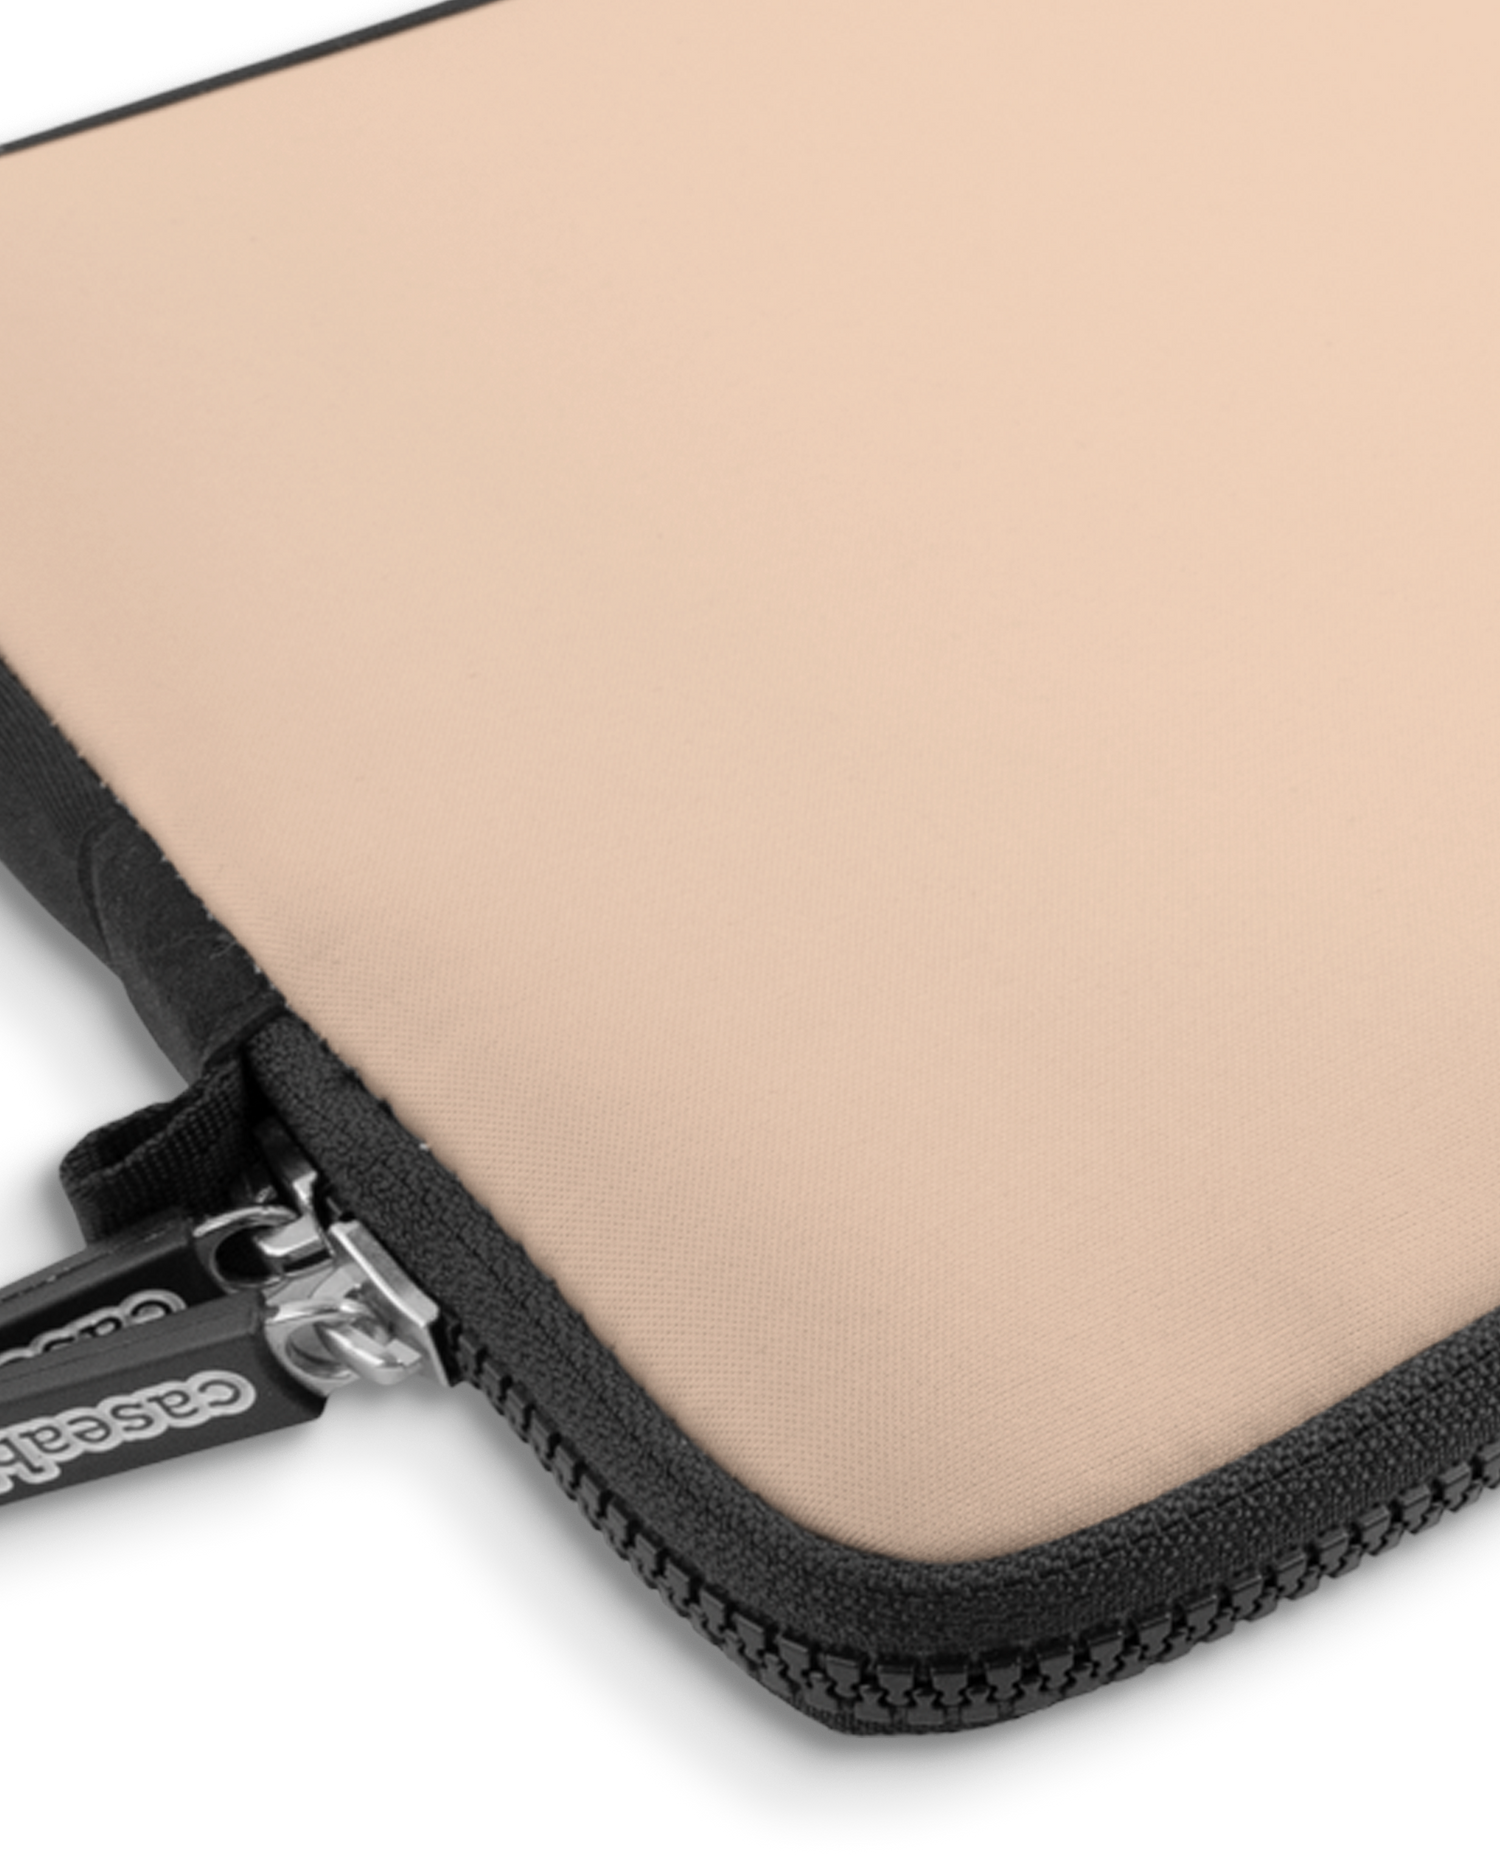 PEACH Premium Laptop Bag 13 inch with device inside